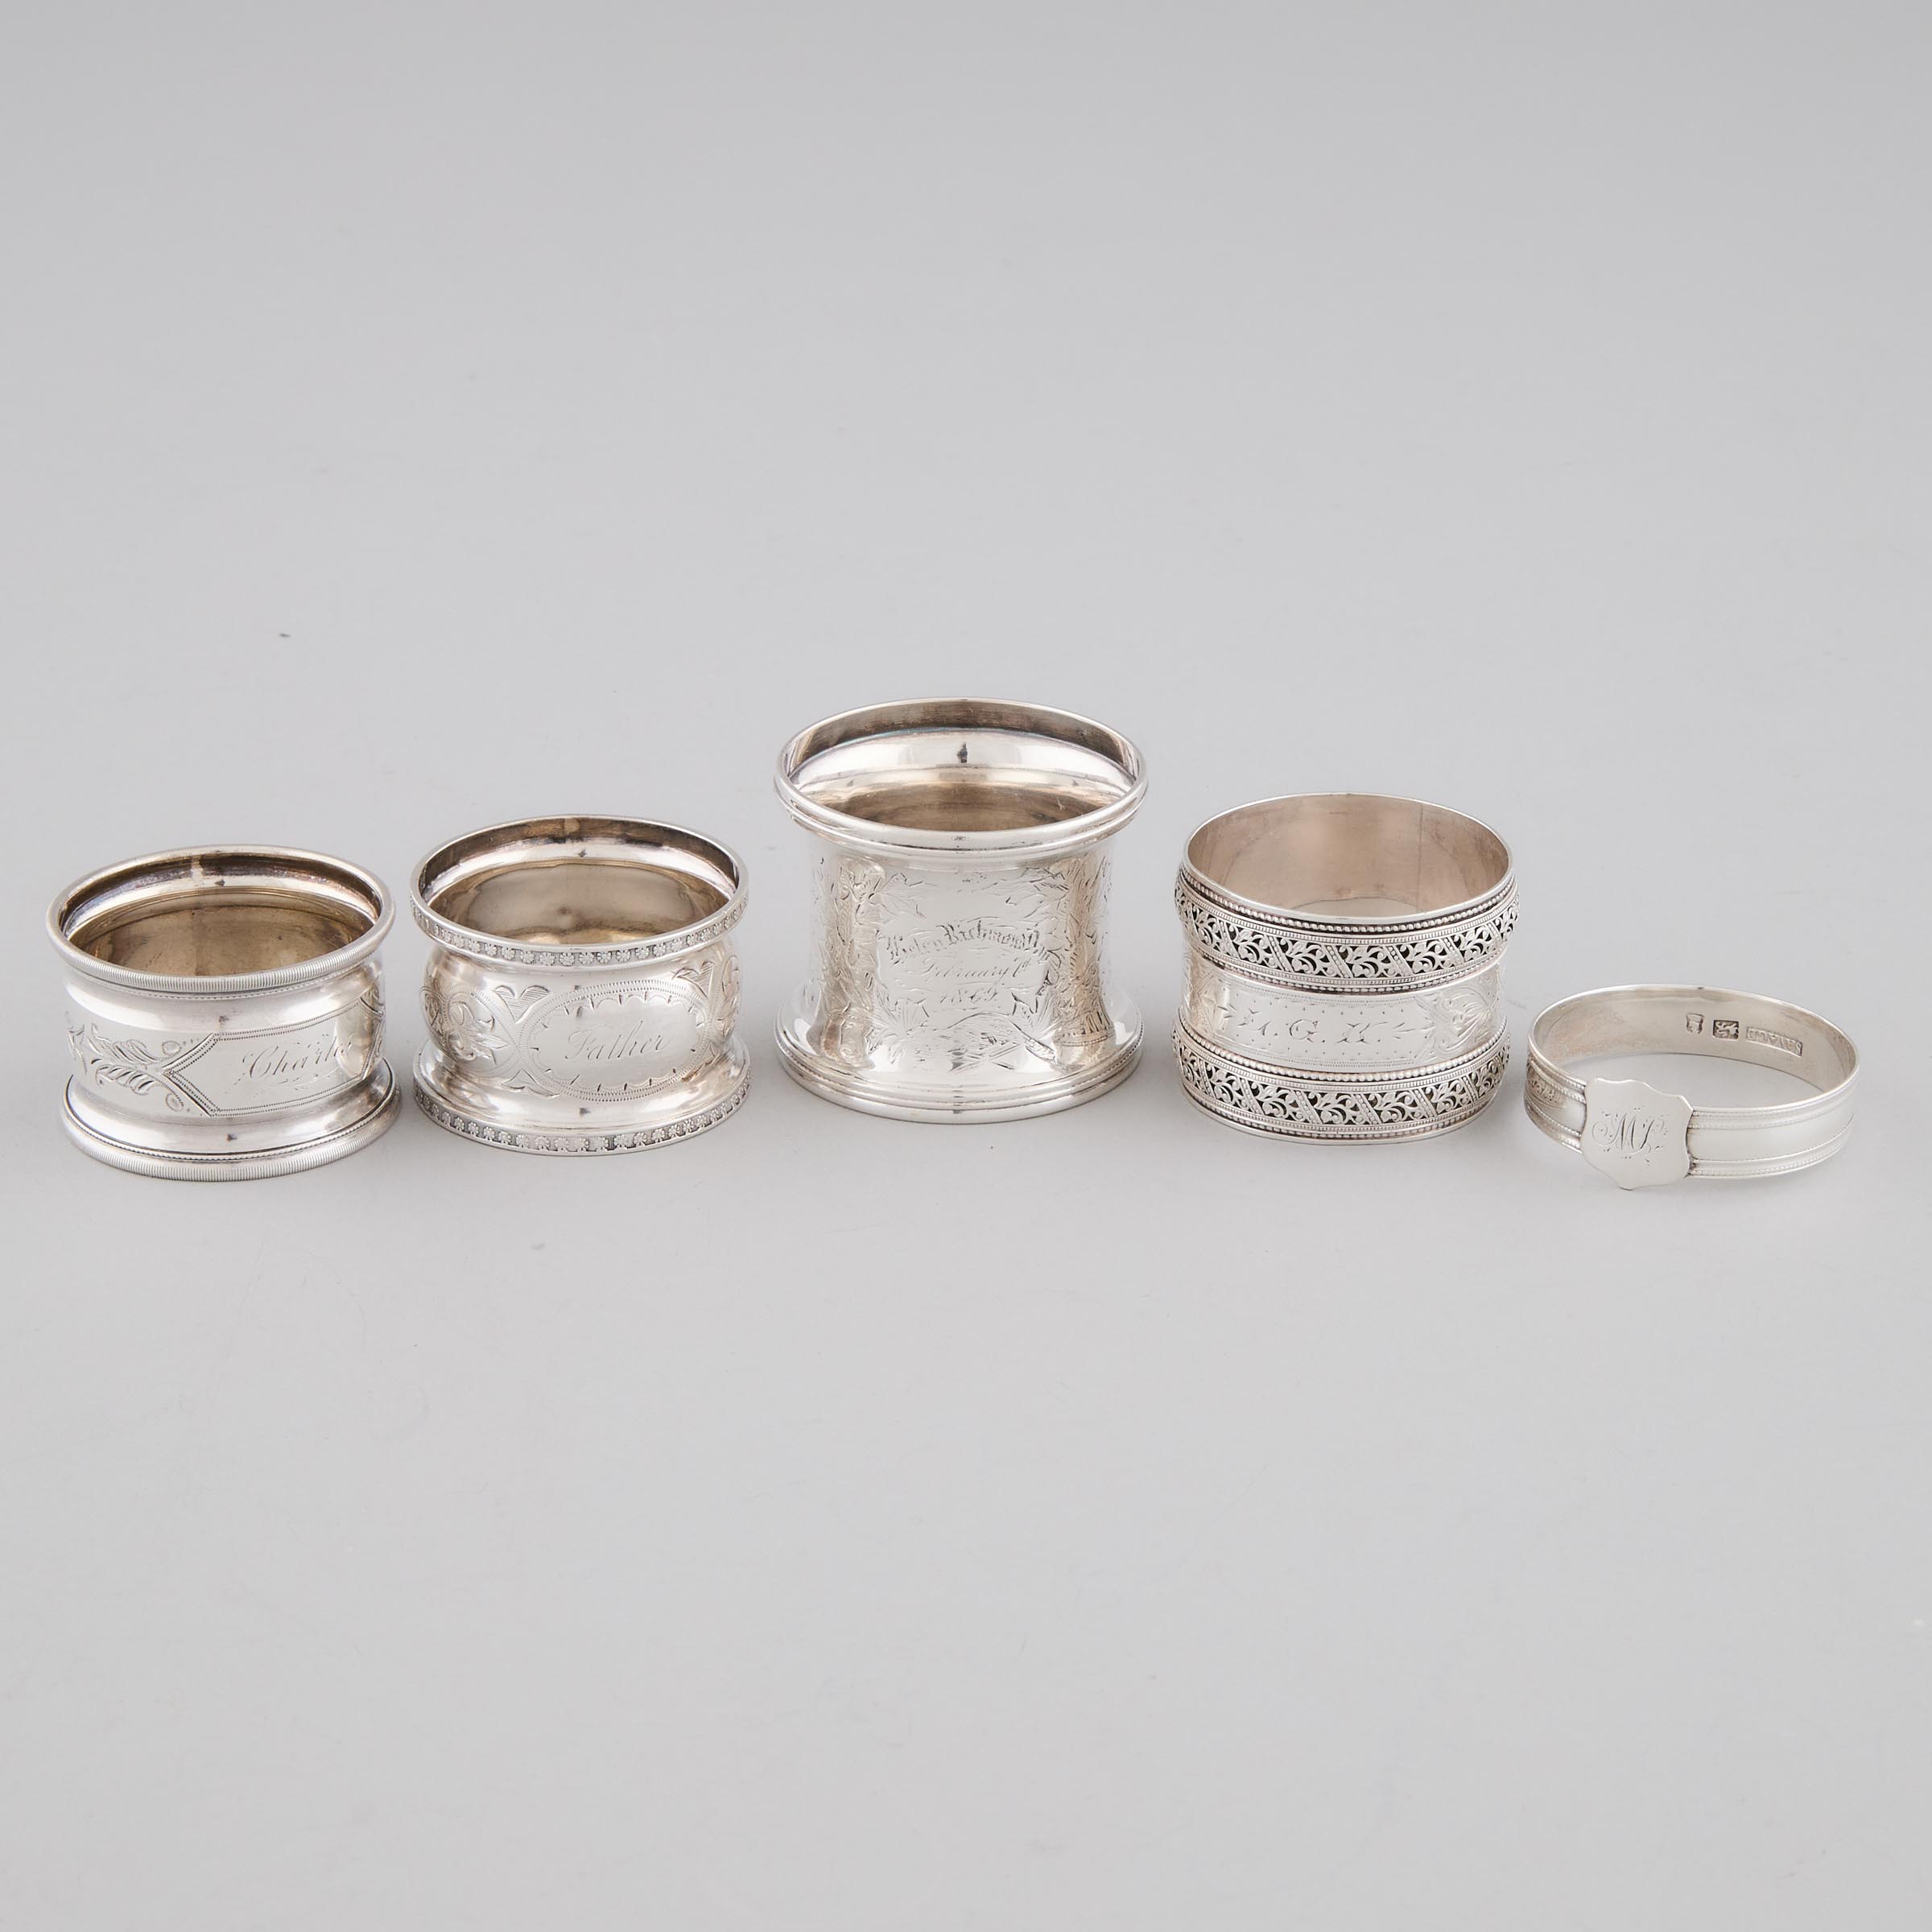 Five Canadian Silver Napkin Rings,